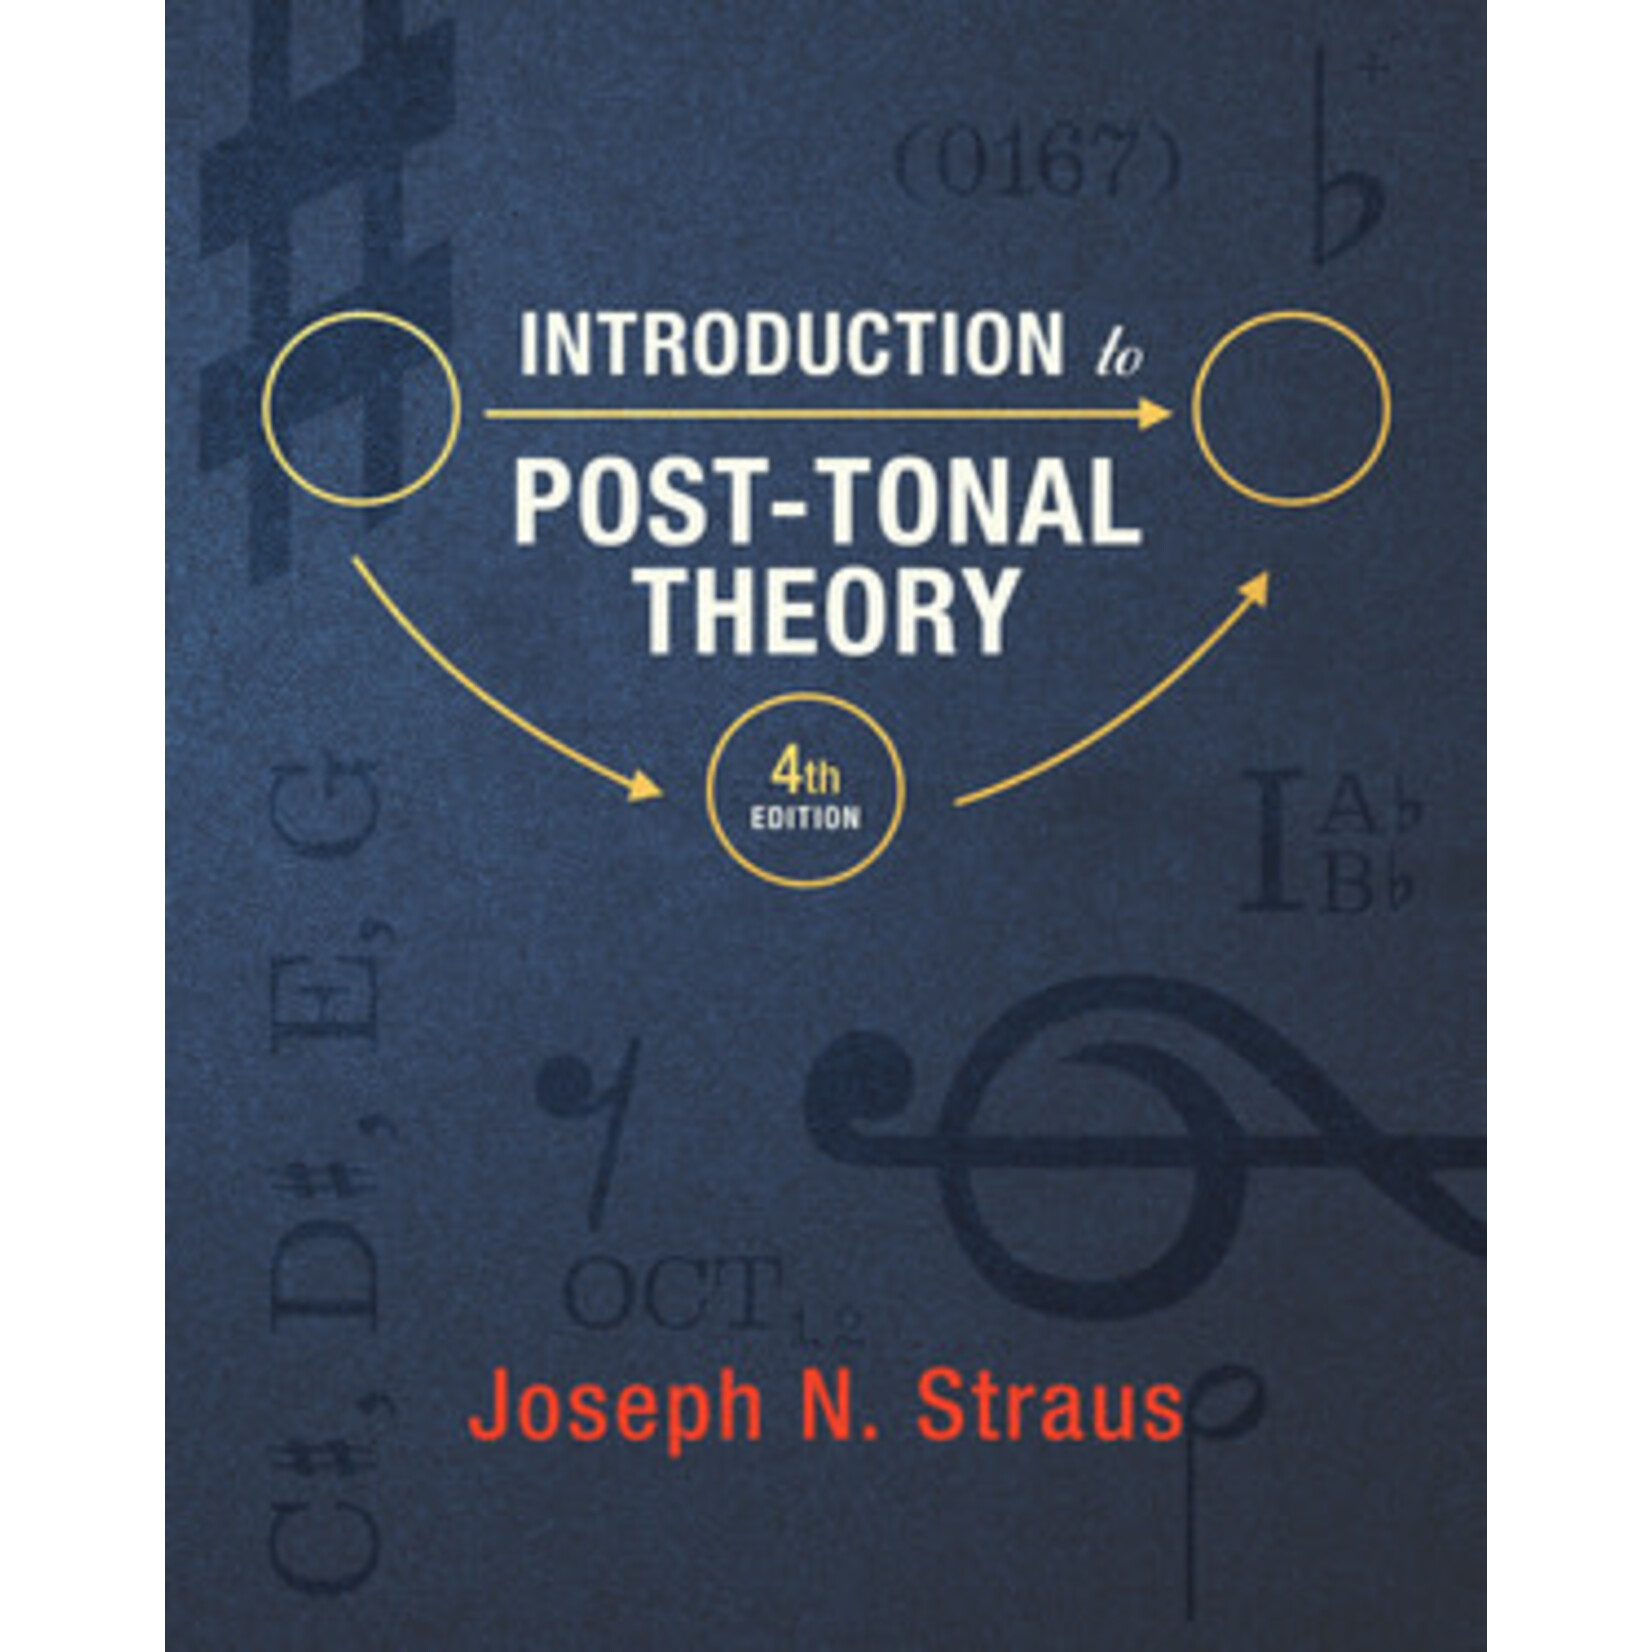 Introduction to Post-Tonal Theory Paperback